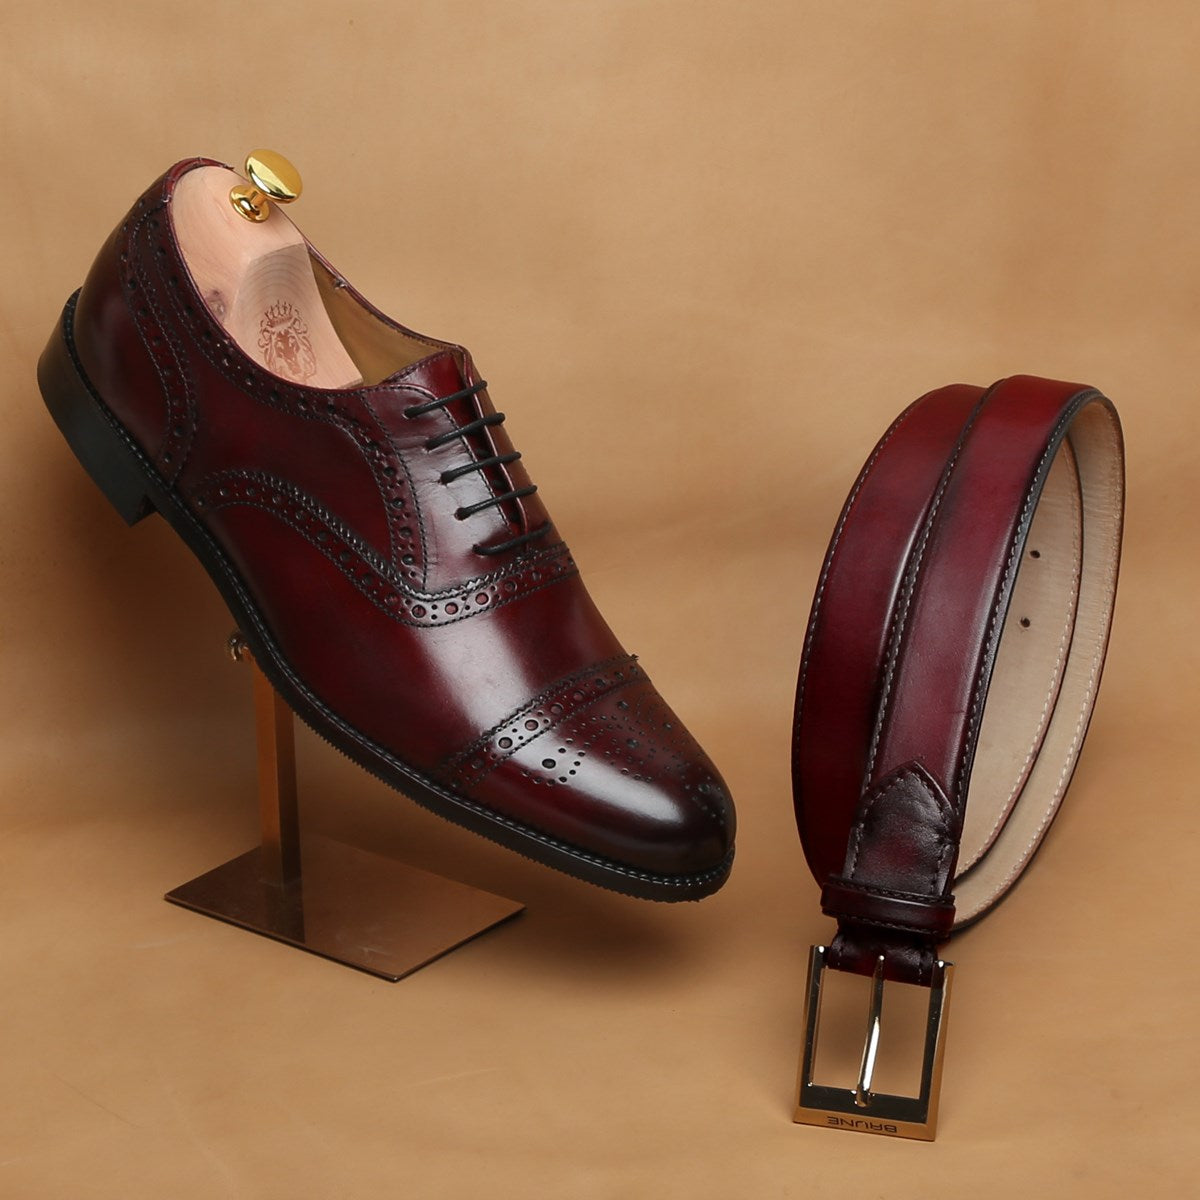 Combo of Wine Mod Quarter Brogue Leather Oxfords Shoes by Brune and ma